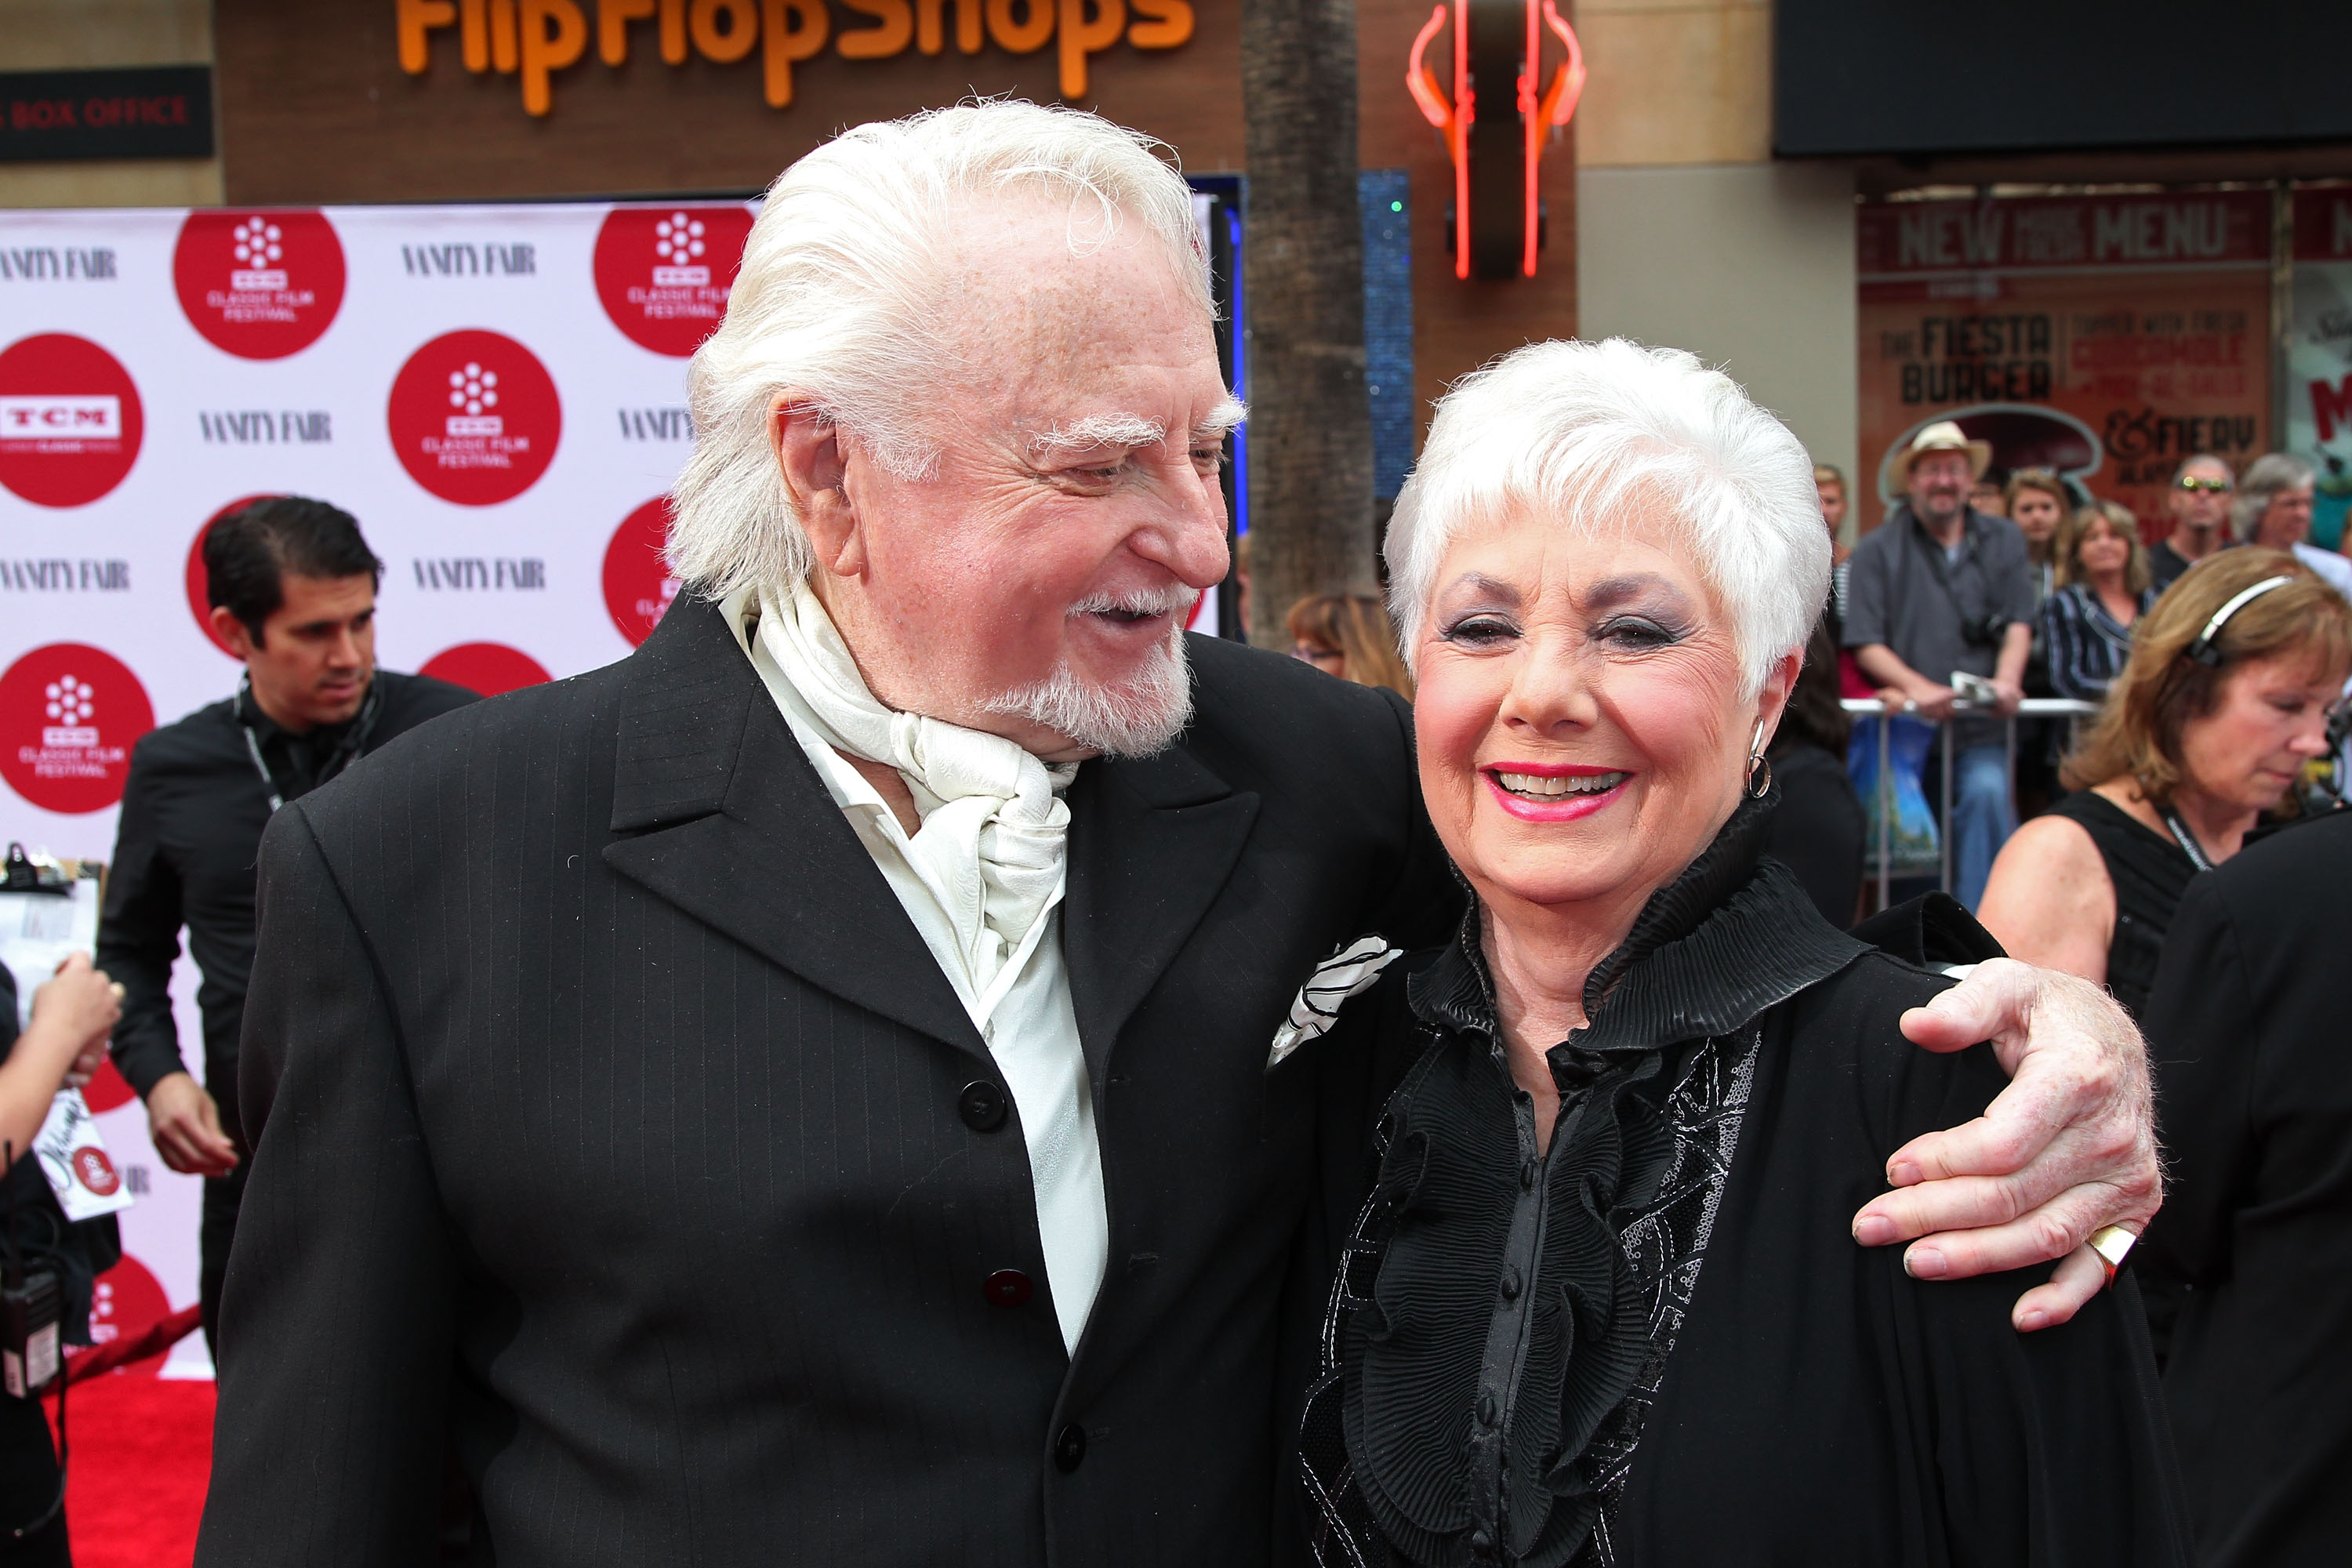 Marty Ingels and Shirley Jones at TCM Classic Film Festival at the opening night gala of "Oklahoma!" on April 10, 2014, in Hollywood, California | Source: Getty Images